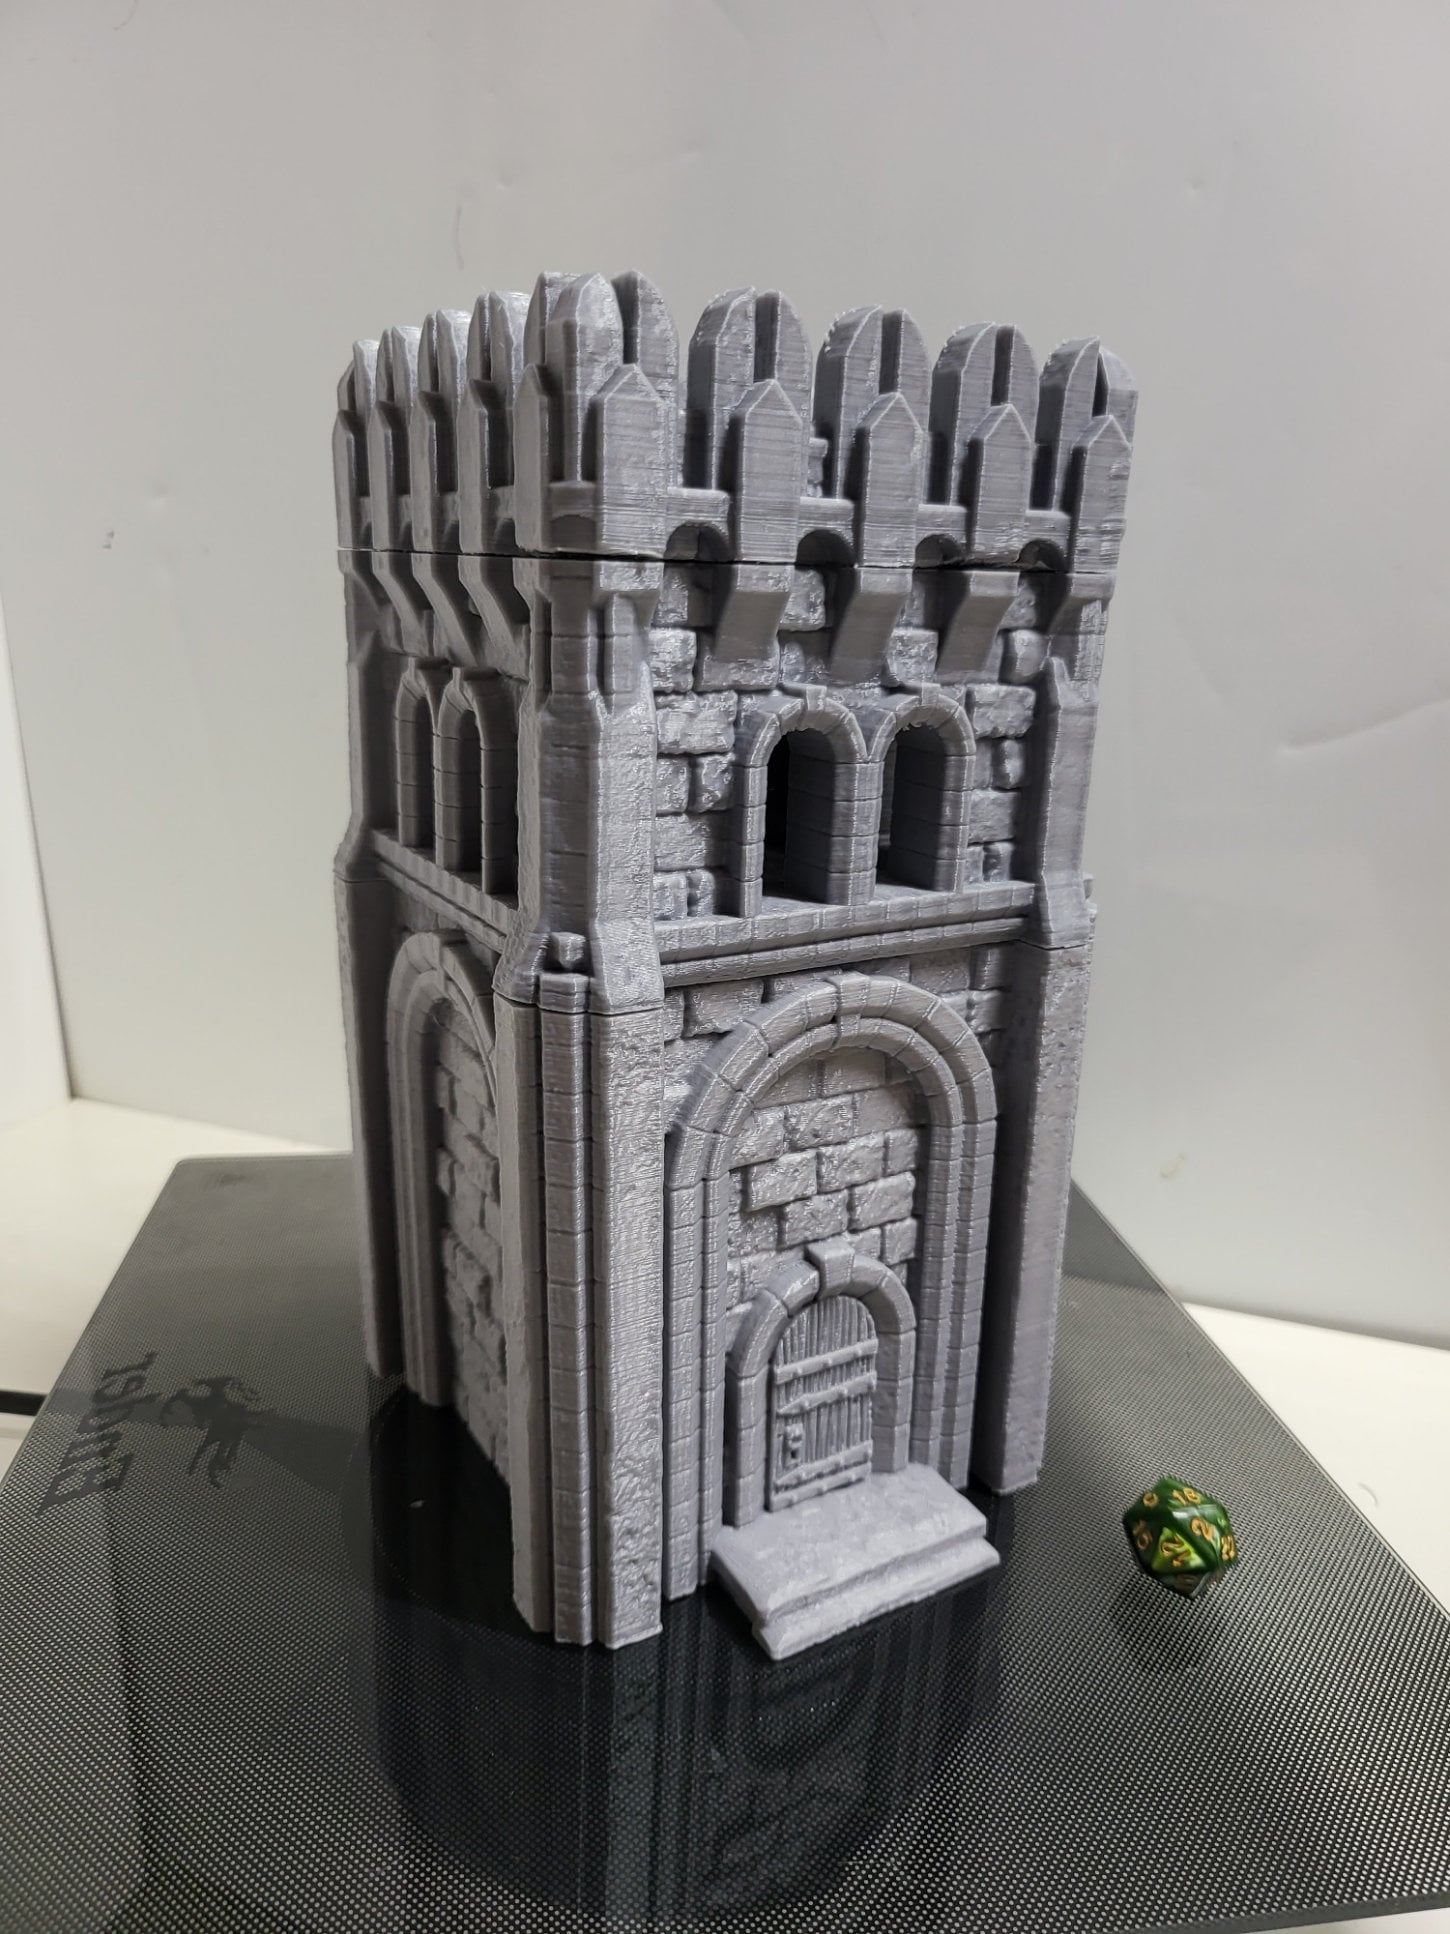 Arkenfel, Ivory Citadel, Trebuchet set, Defense Weapon, Tower Defenses, Field defenses, Dungeons and Dragons, Lord of the Rings, Tower, Ivory Tower, Tower Set, Osgiliath, Minas Tirith, Mordheim, Osgiliath, tabletop terrain, terrain, game table